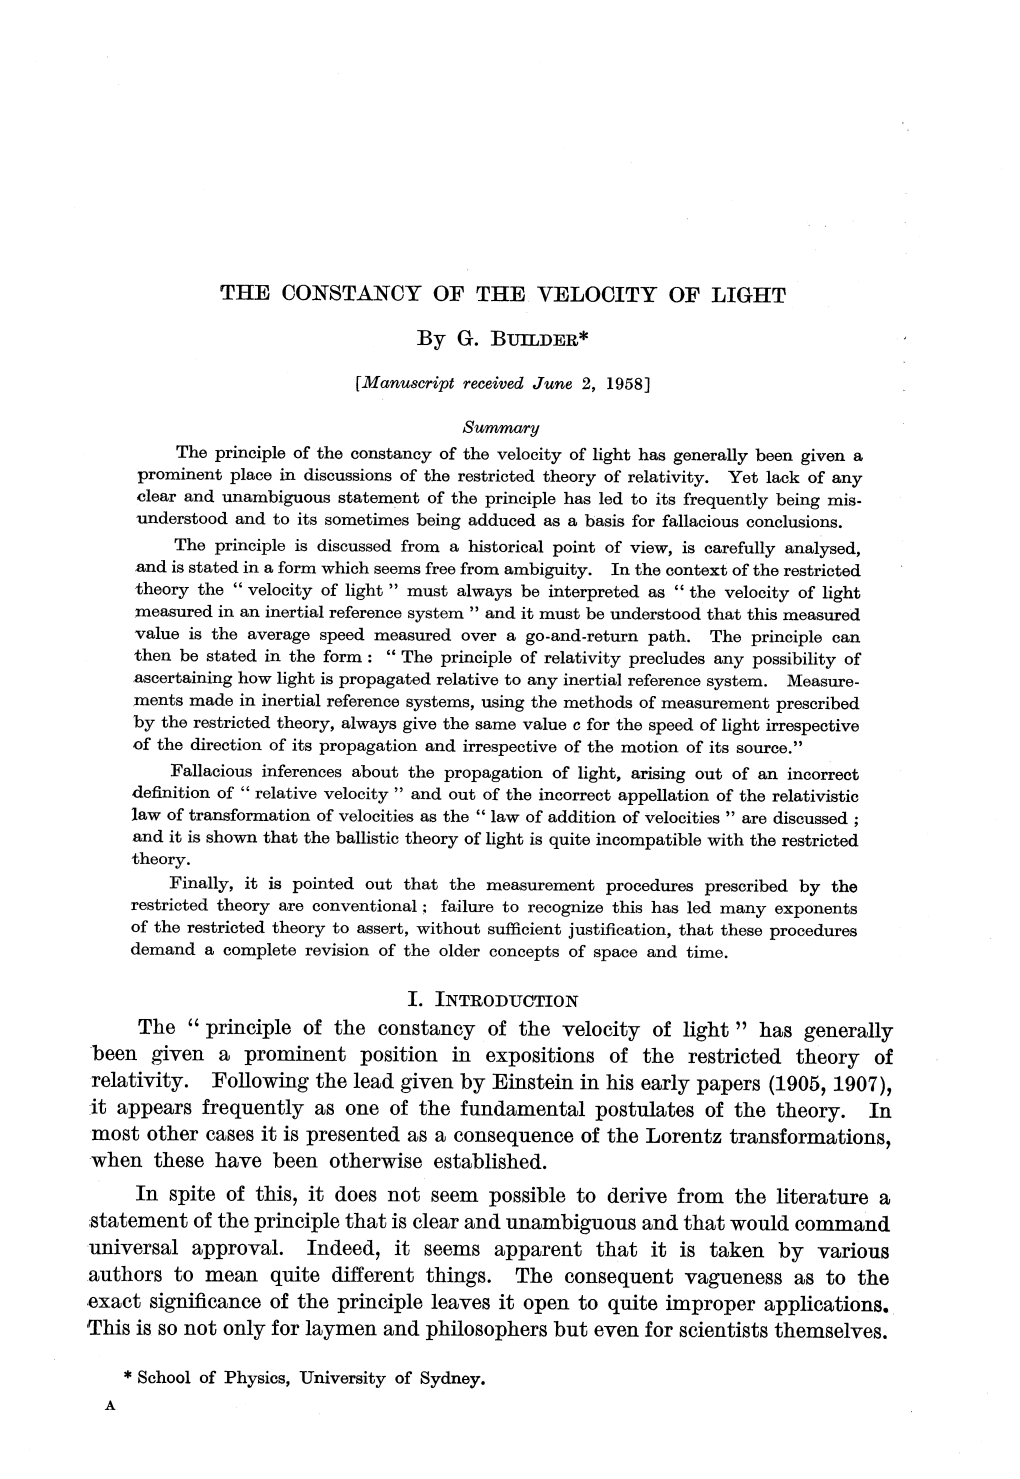 "Principle of the Constancy of the Velocity of Light" Has Generally Been Given a Prominent Position in Expositions of the Restricted Theory of Relativity